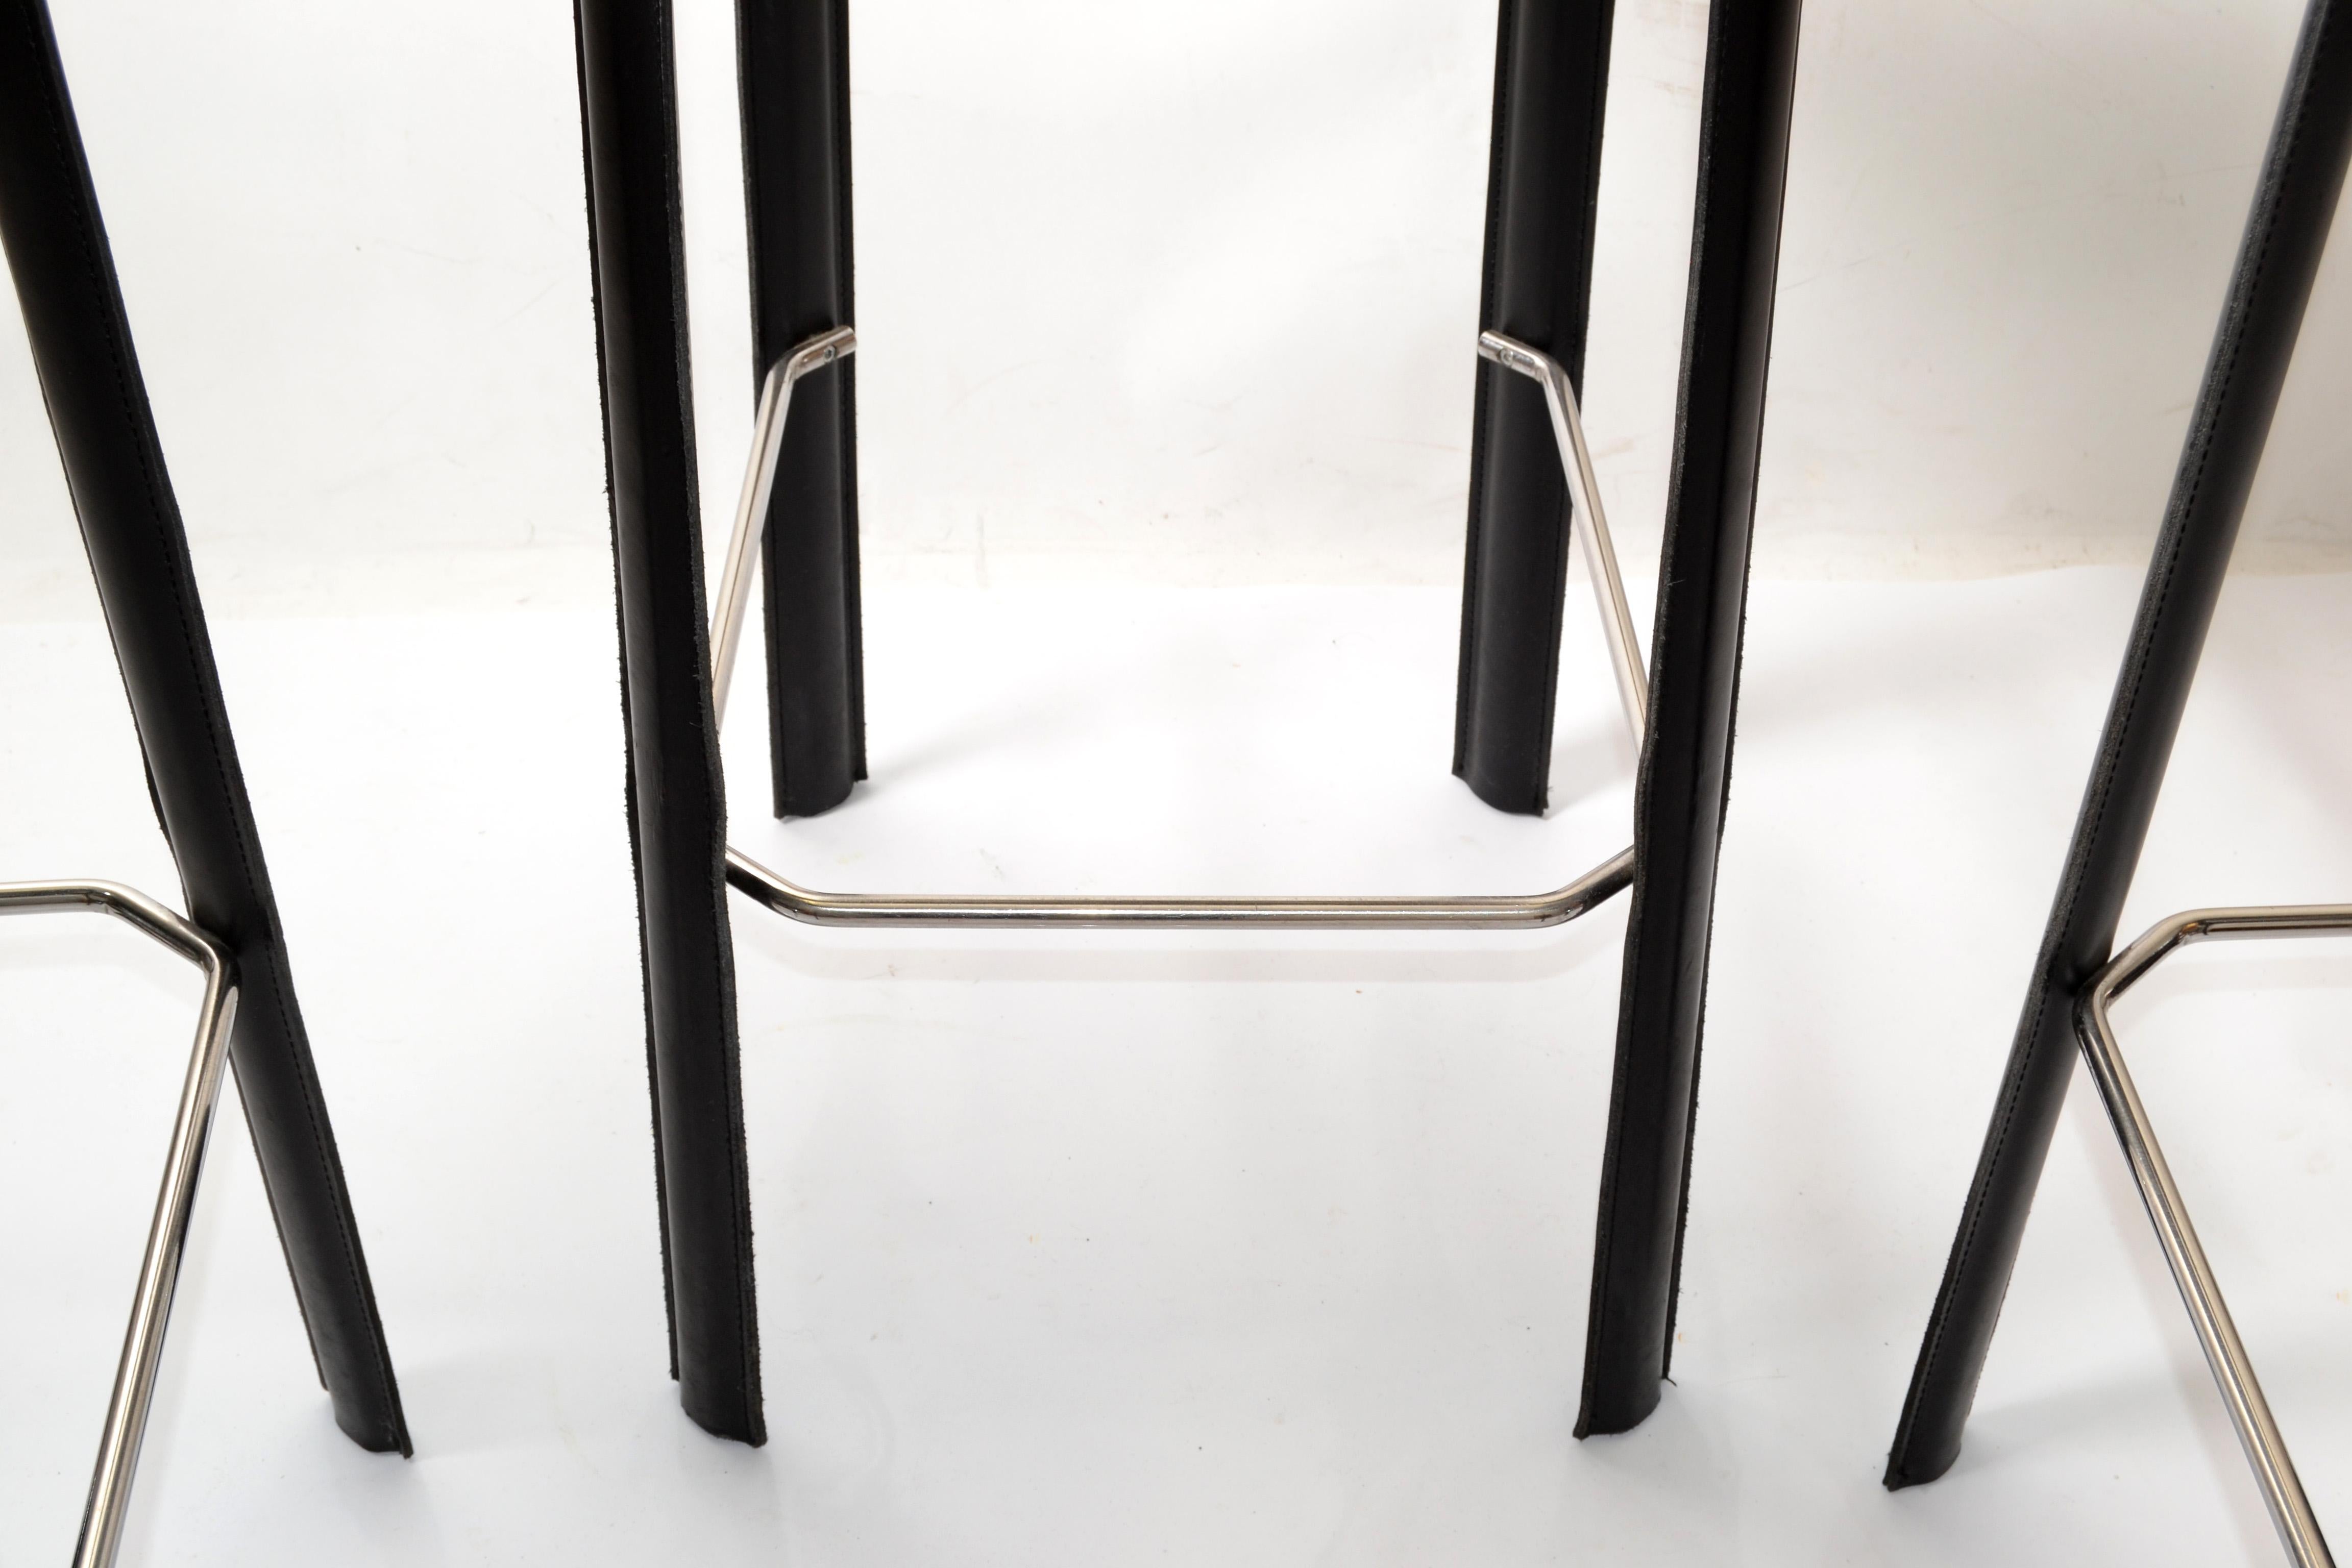 Set of 3 Italian Hand Stitched Frag Black Leather Chrome Bar Stools Contemporary 5